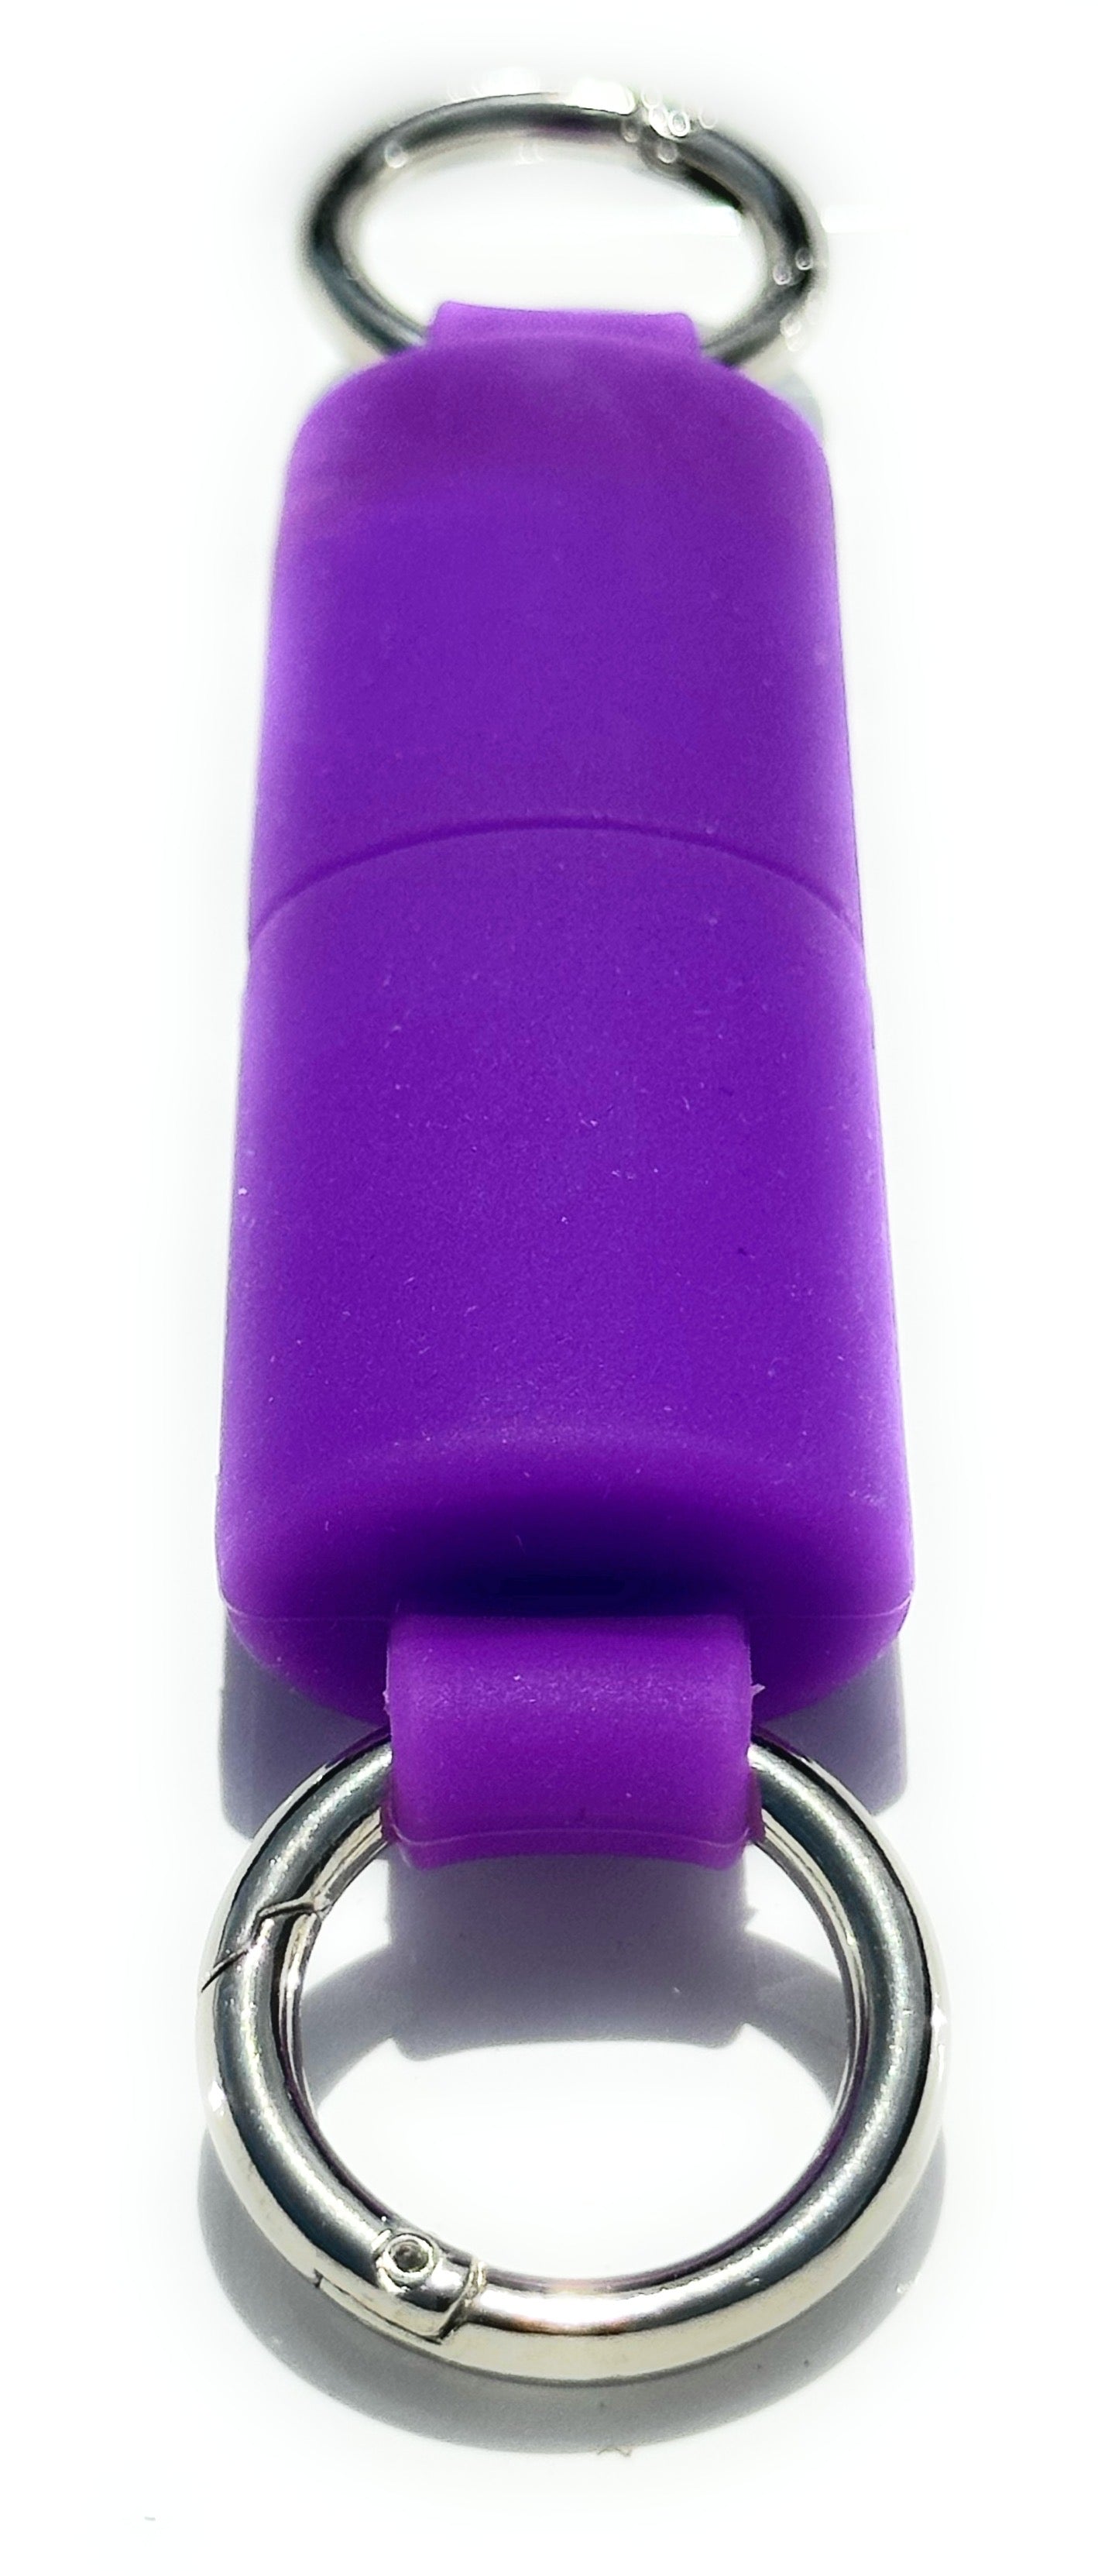 Keychain Lighter Safety Caps with Spring Clips (2 Pack)